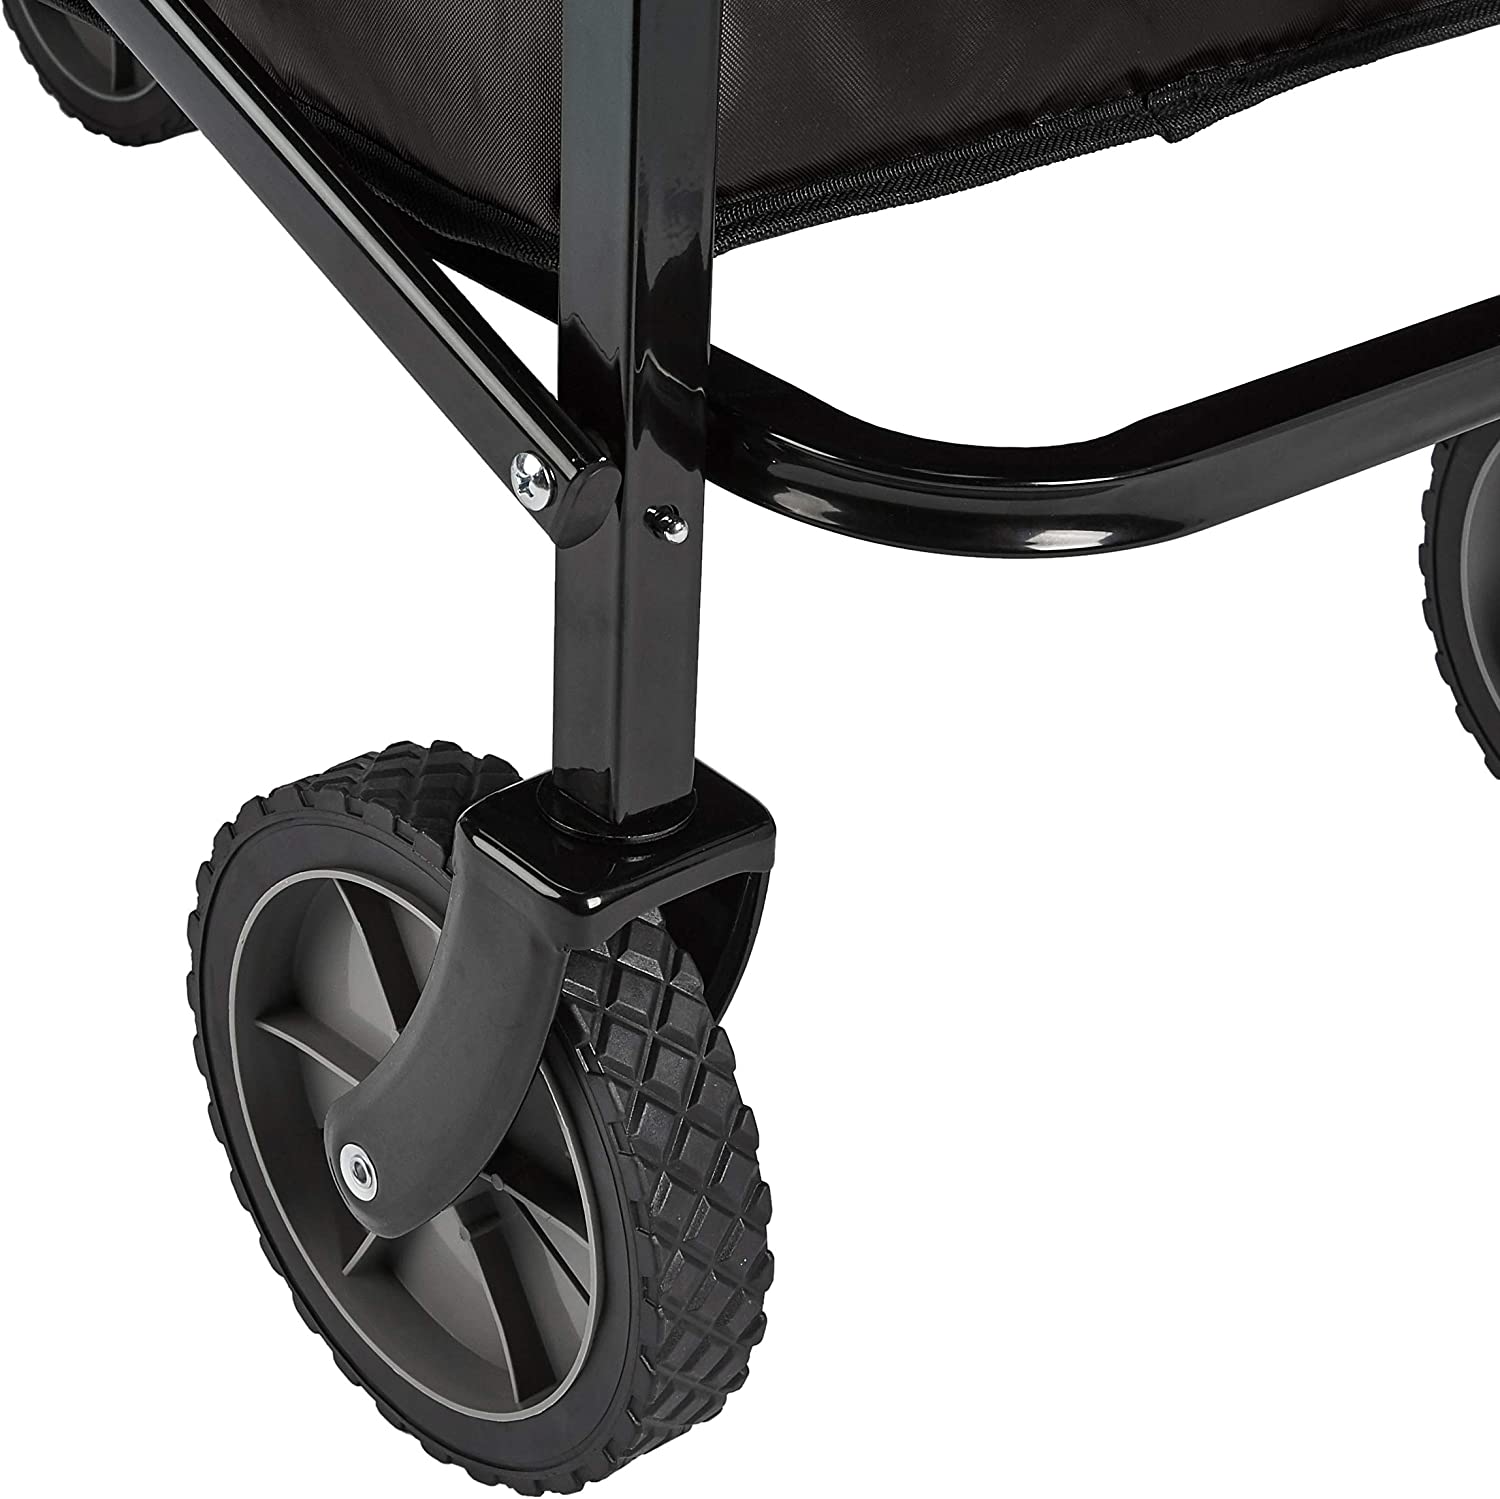 Collapsible Folding Outdoor Utility Wagon with Cover Bag, Black